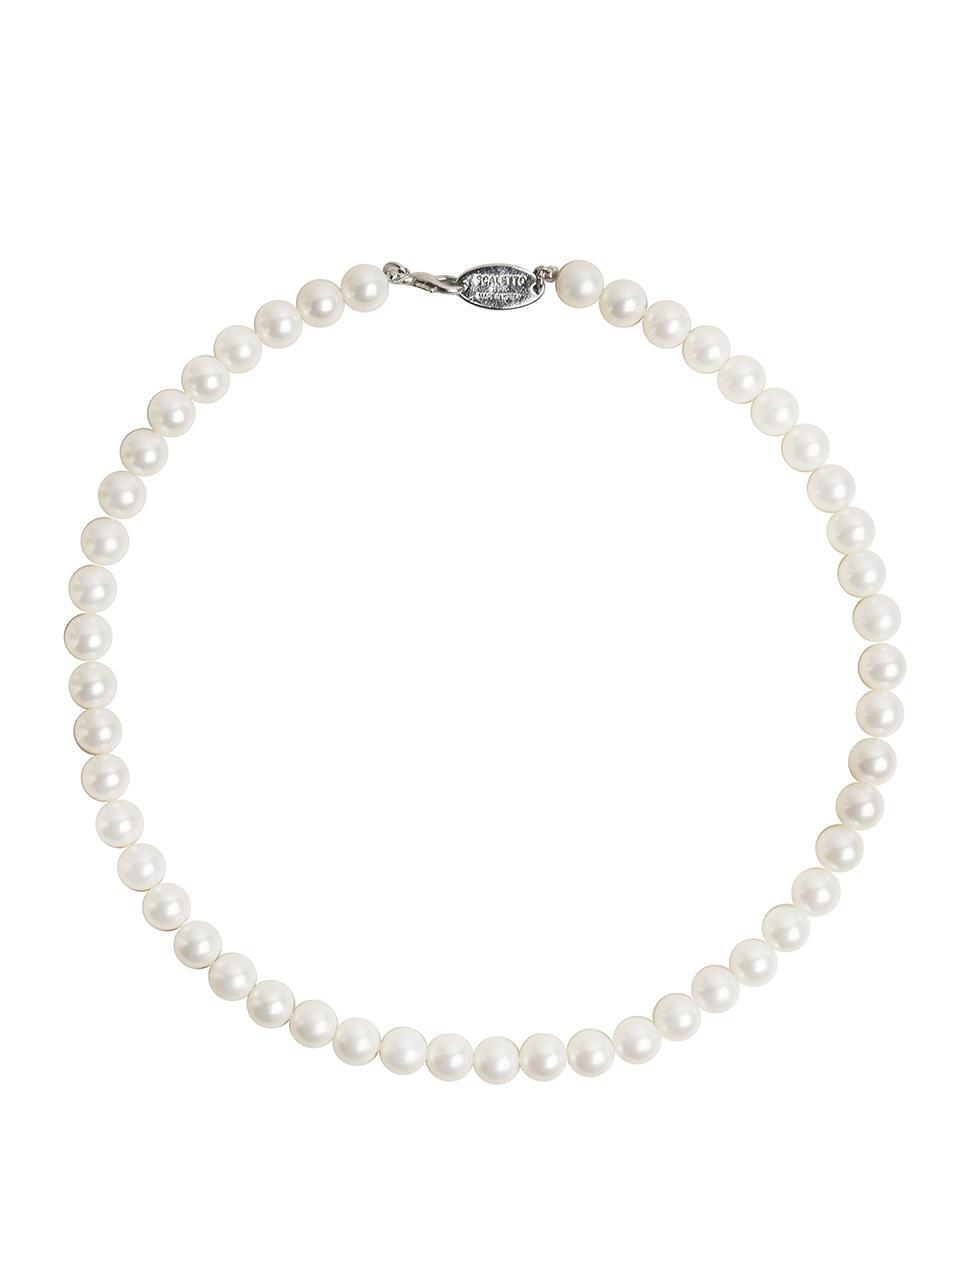 WIL203 Shining Crystal Pearl Necklace